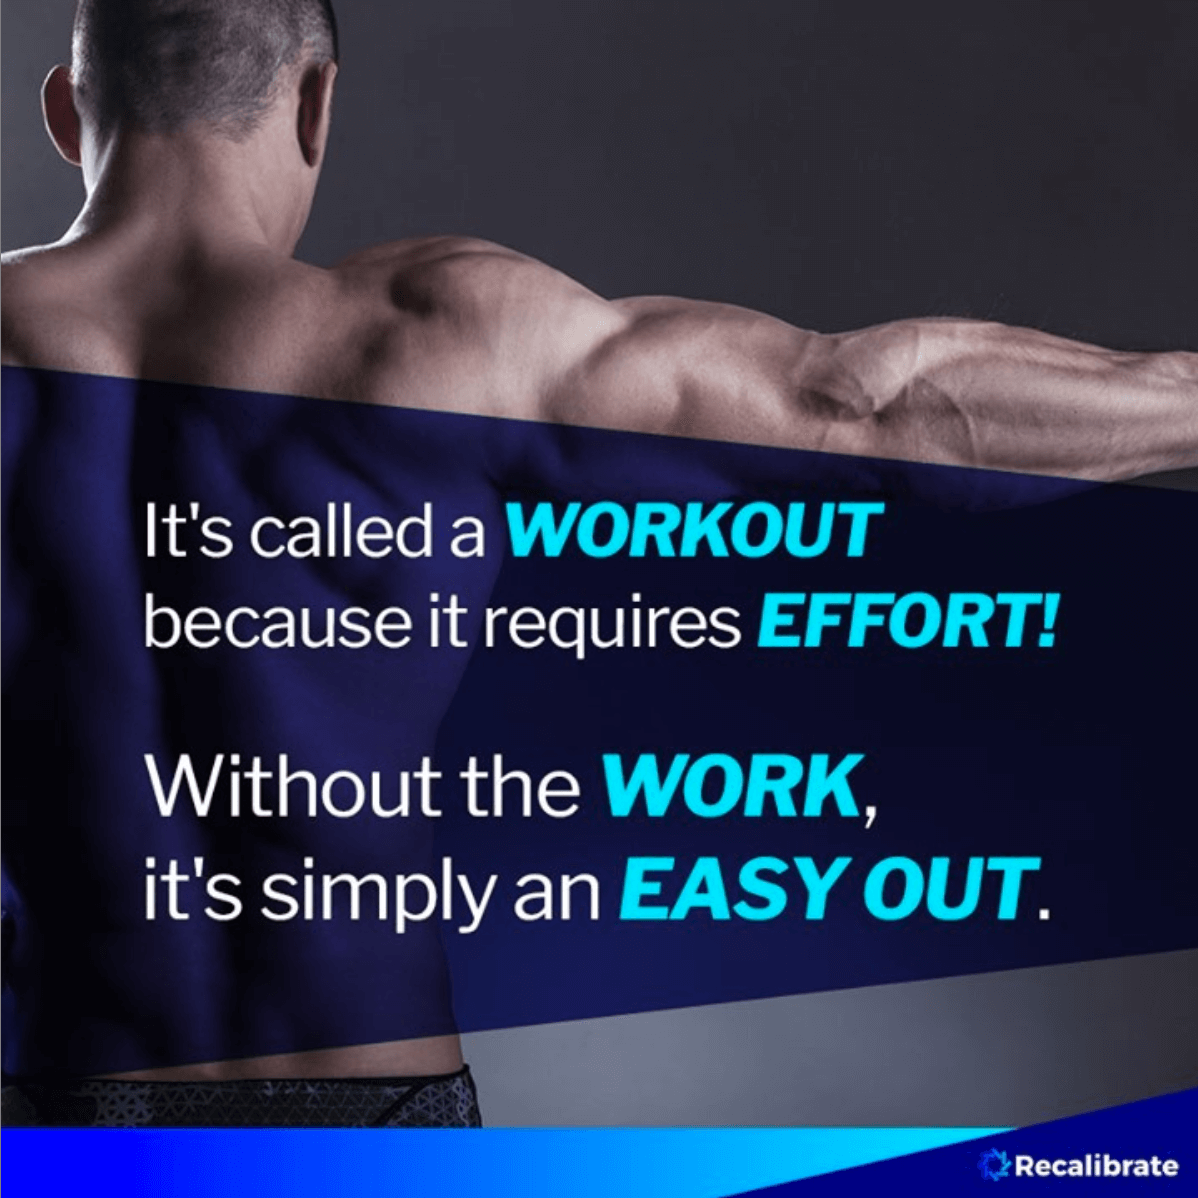 image saying 'it's called a WORKOUT because it requires EFFORT